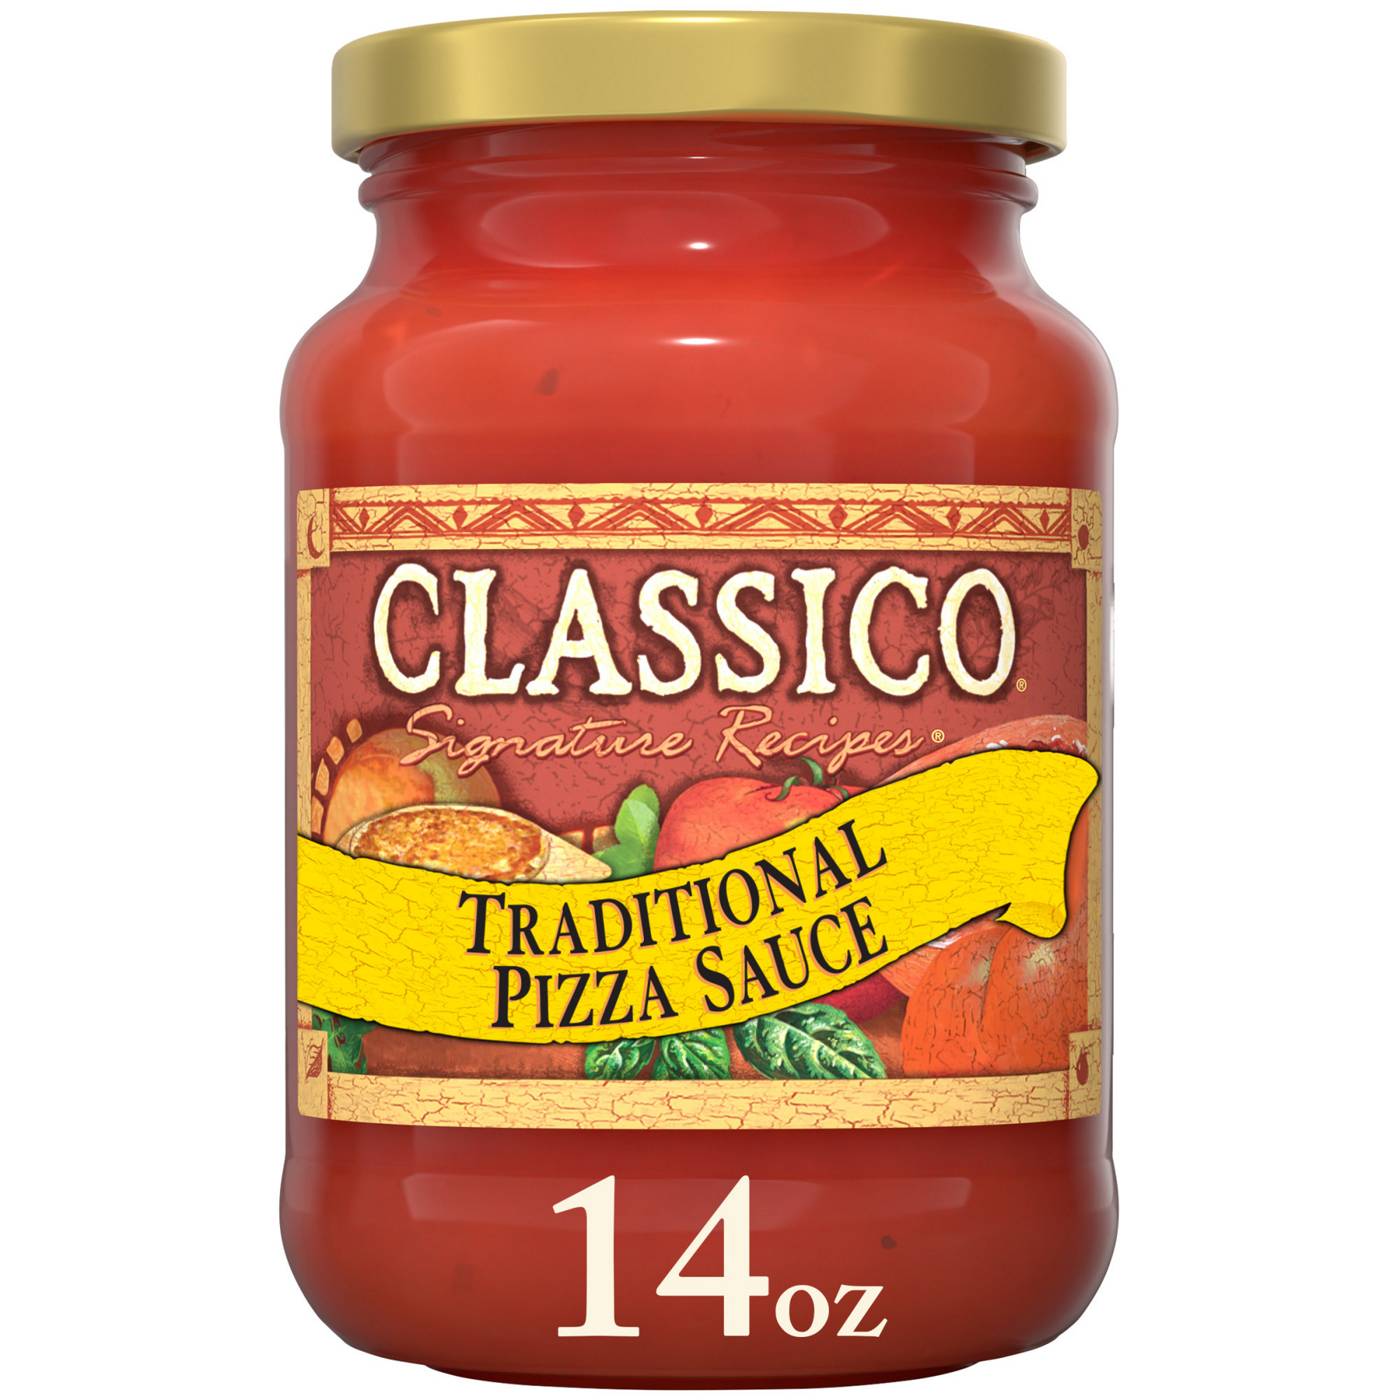 Classico Traditional Pizza Sauce; image 1 of 9